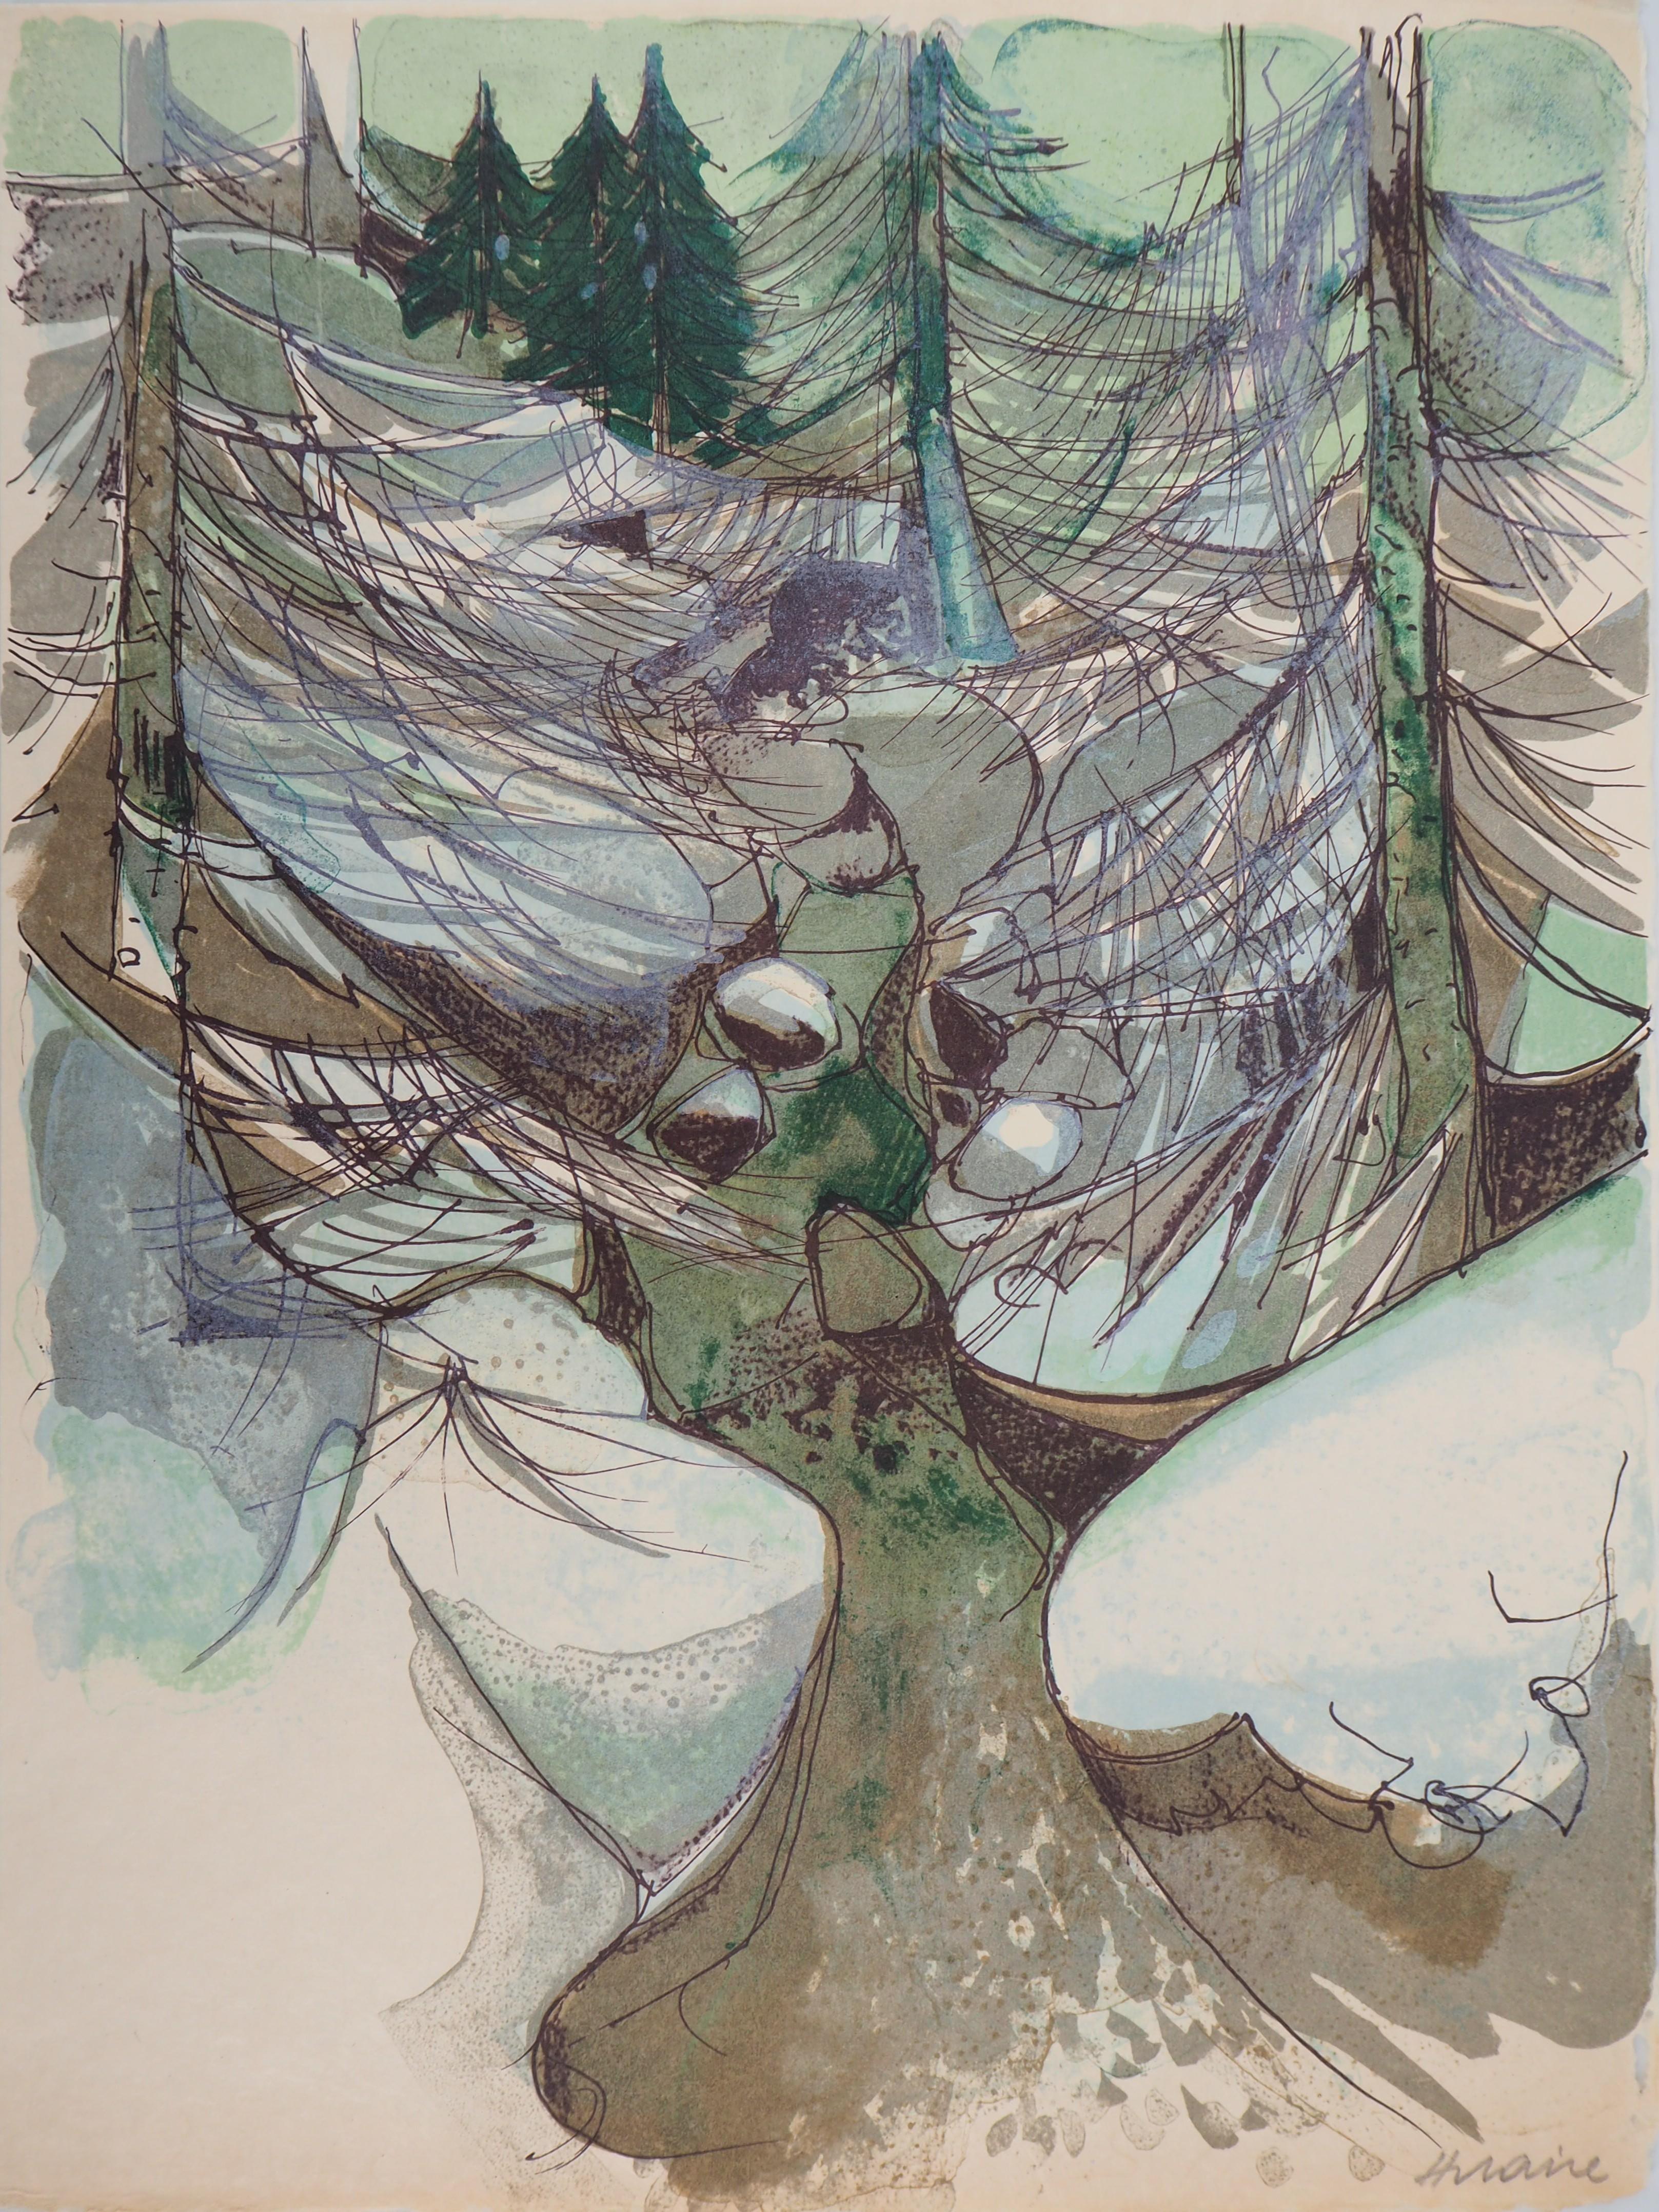 Camille Hilaire Landscape Print - Rivers in France : Mountain Torrent in Winter - Original handsigned lithograph